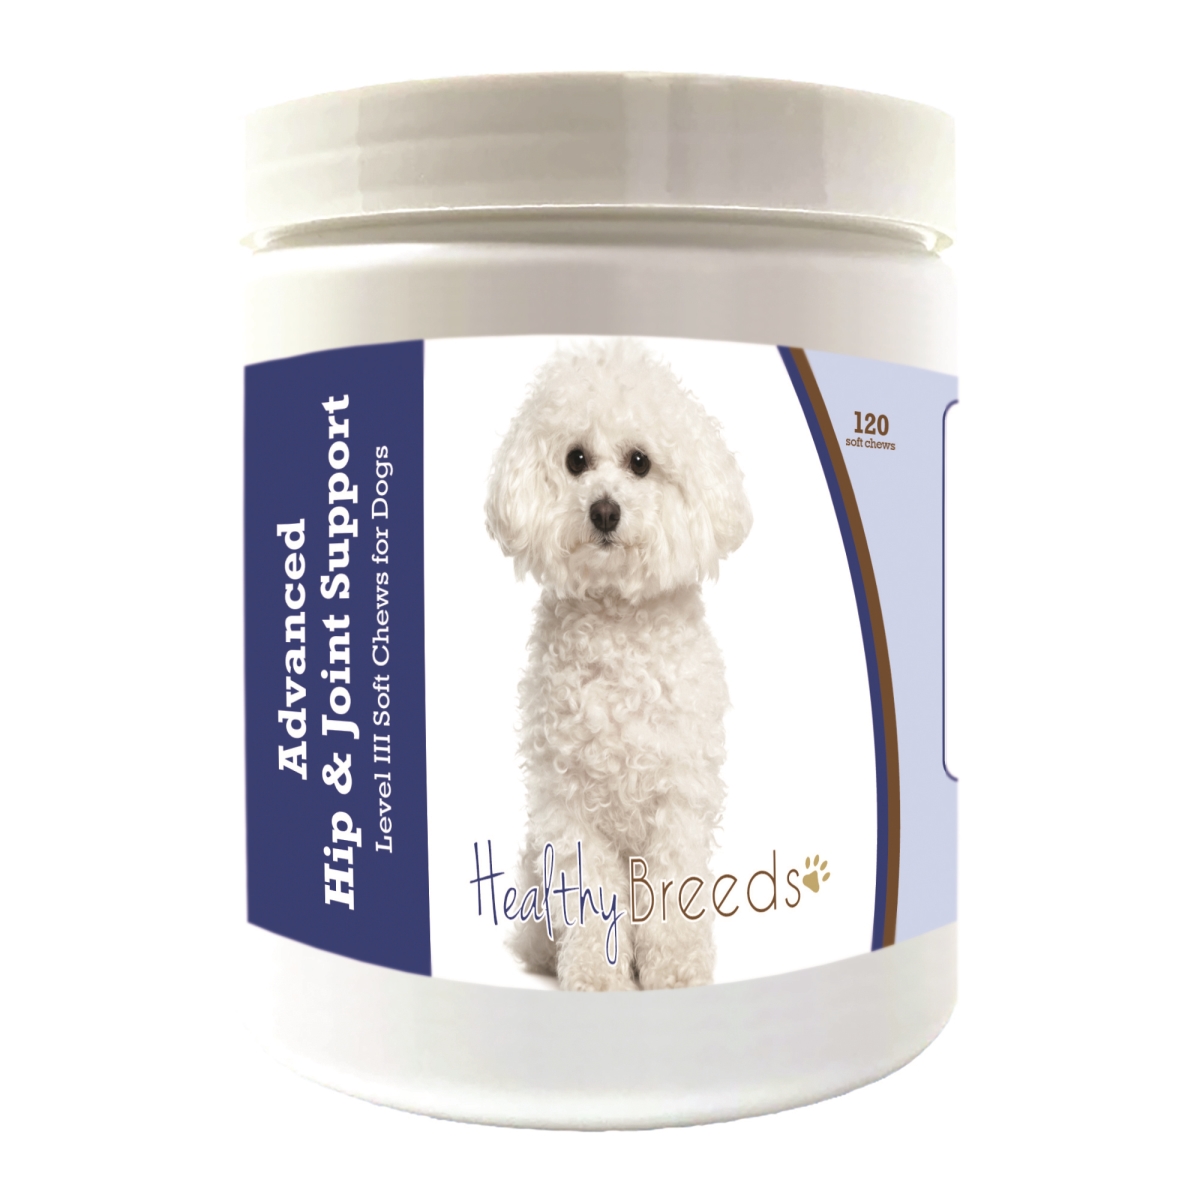 Picture of Healthy Breeds 192959897630 Bichon Frise Advanced Hip & Joint Support Level III Soft Chews for Dogs